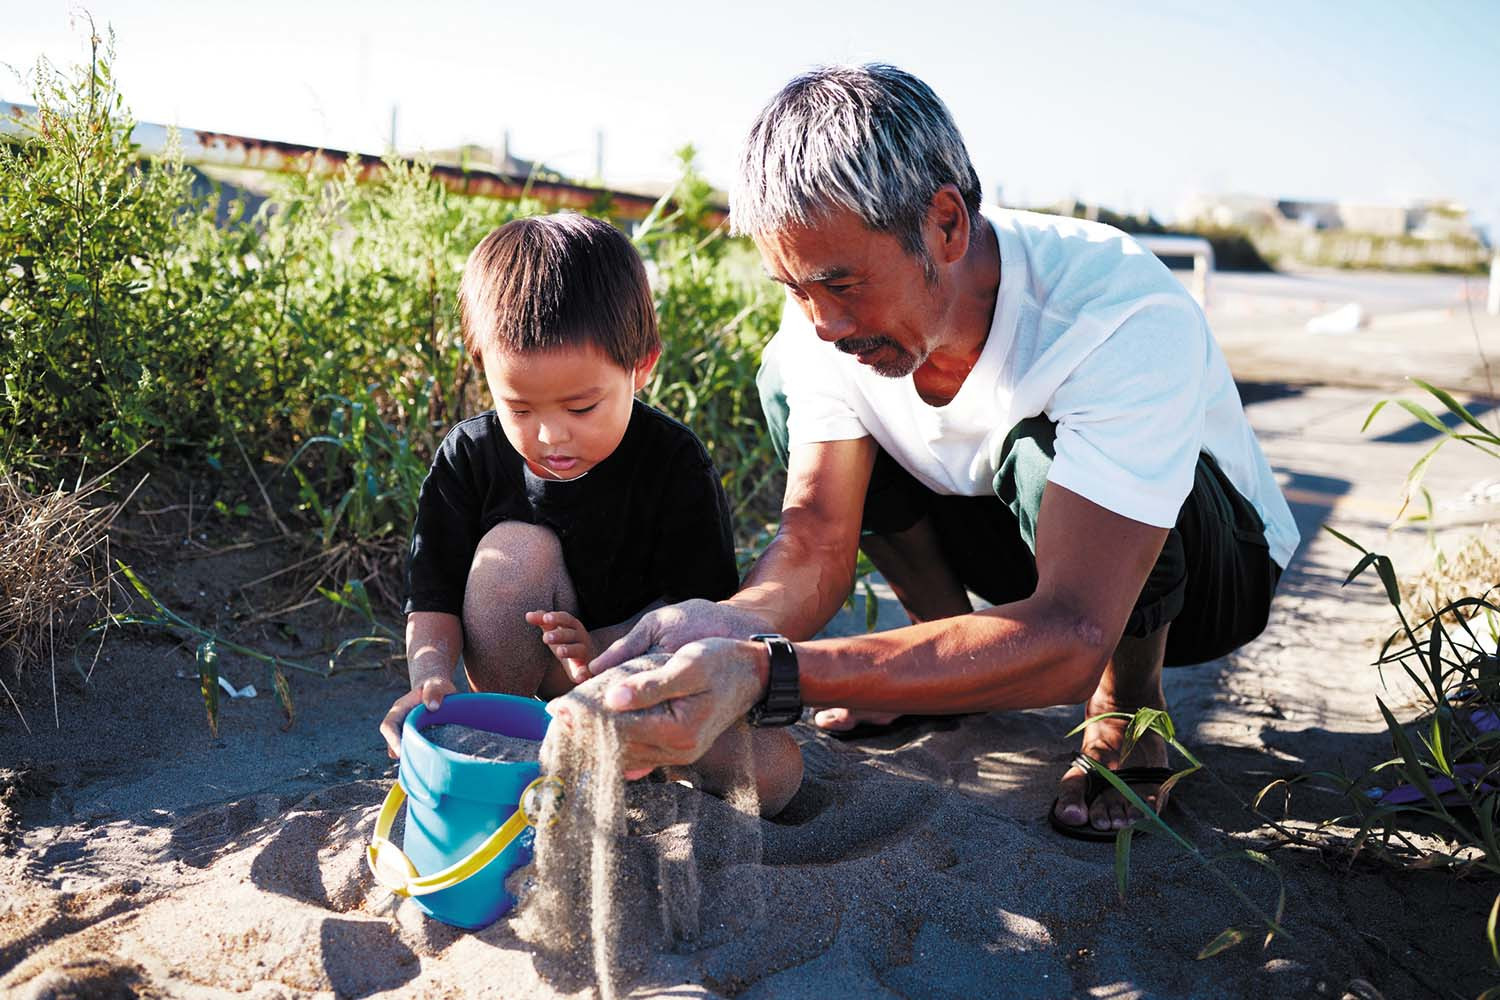 photo of a man doing a deep squat while playing with his grandchild; they have a bucket and are sifting sand on a beach